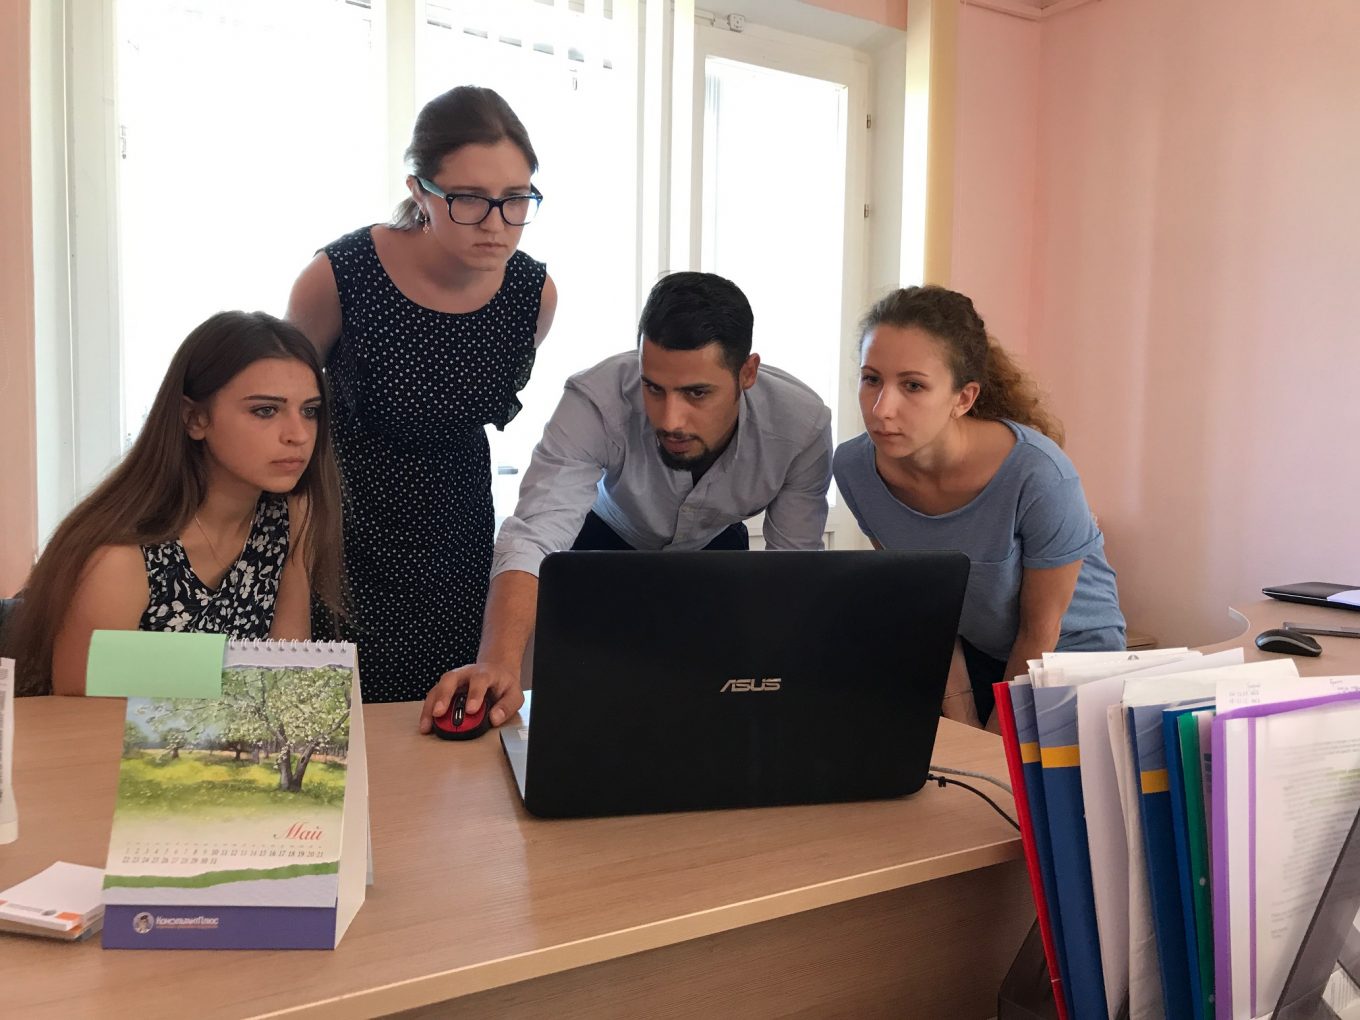 © UNHCR/ Charlotte Arnaud / A few days after the training, Mohammad Anini from the deployment team visited Volha Bakhur Julia Dvydova and Hanna Bystrova in the offices of the Refugee Counseling Service, to answer questions and support the new users. 